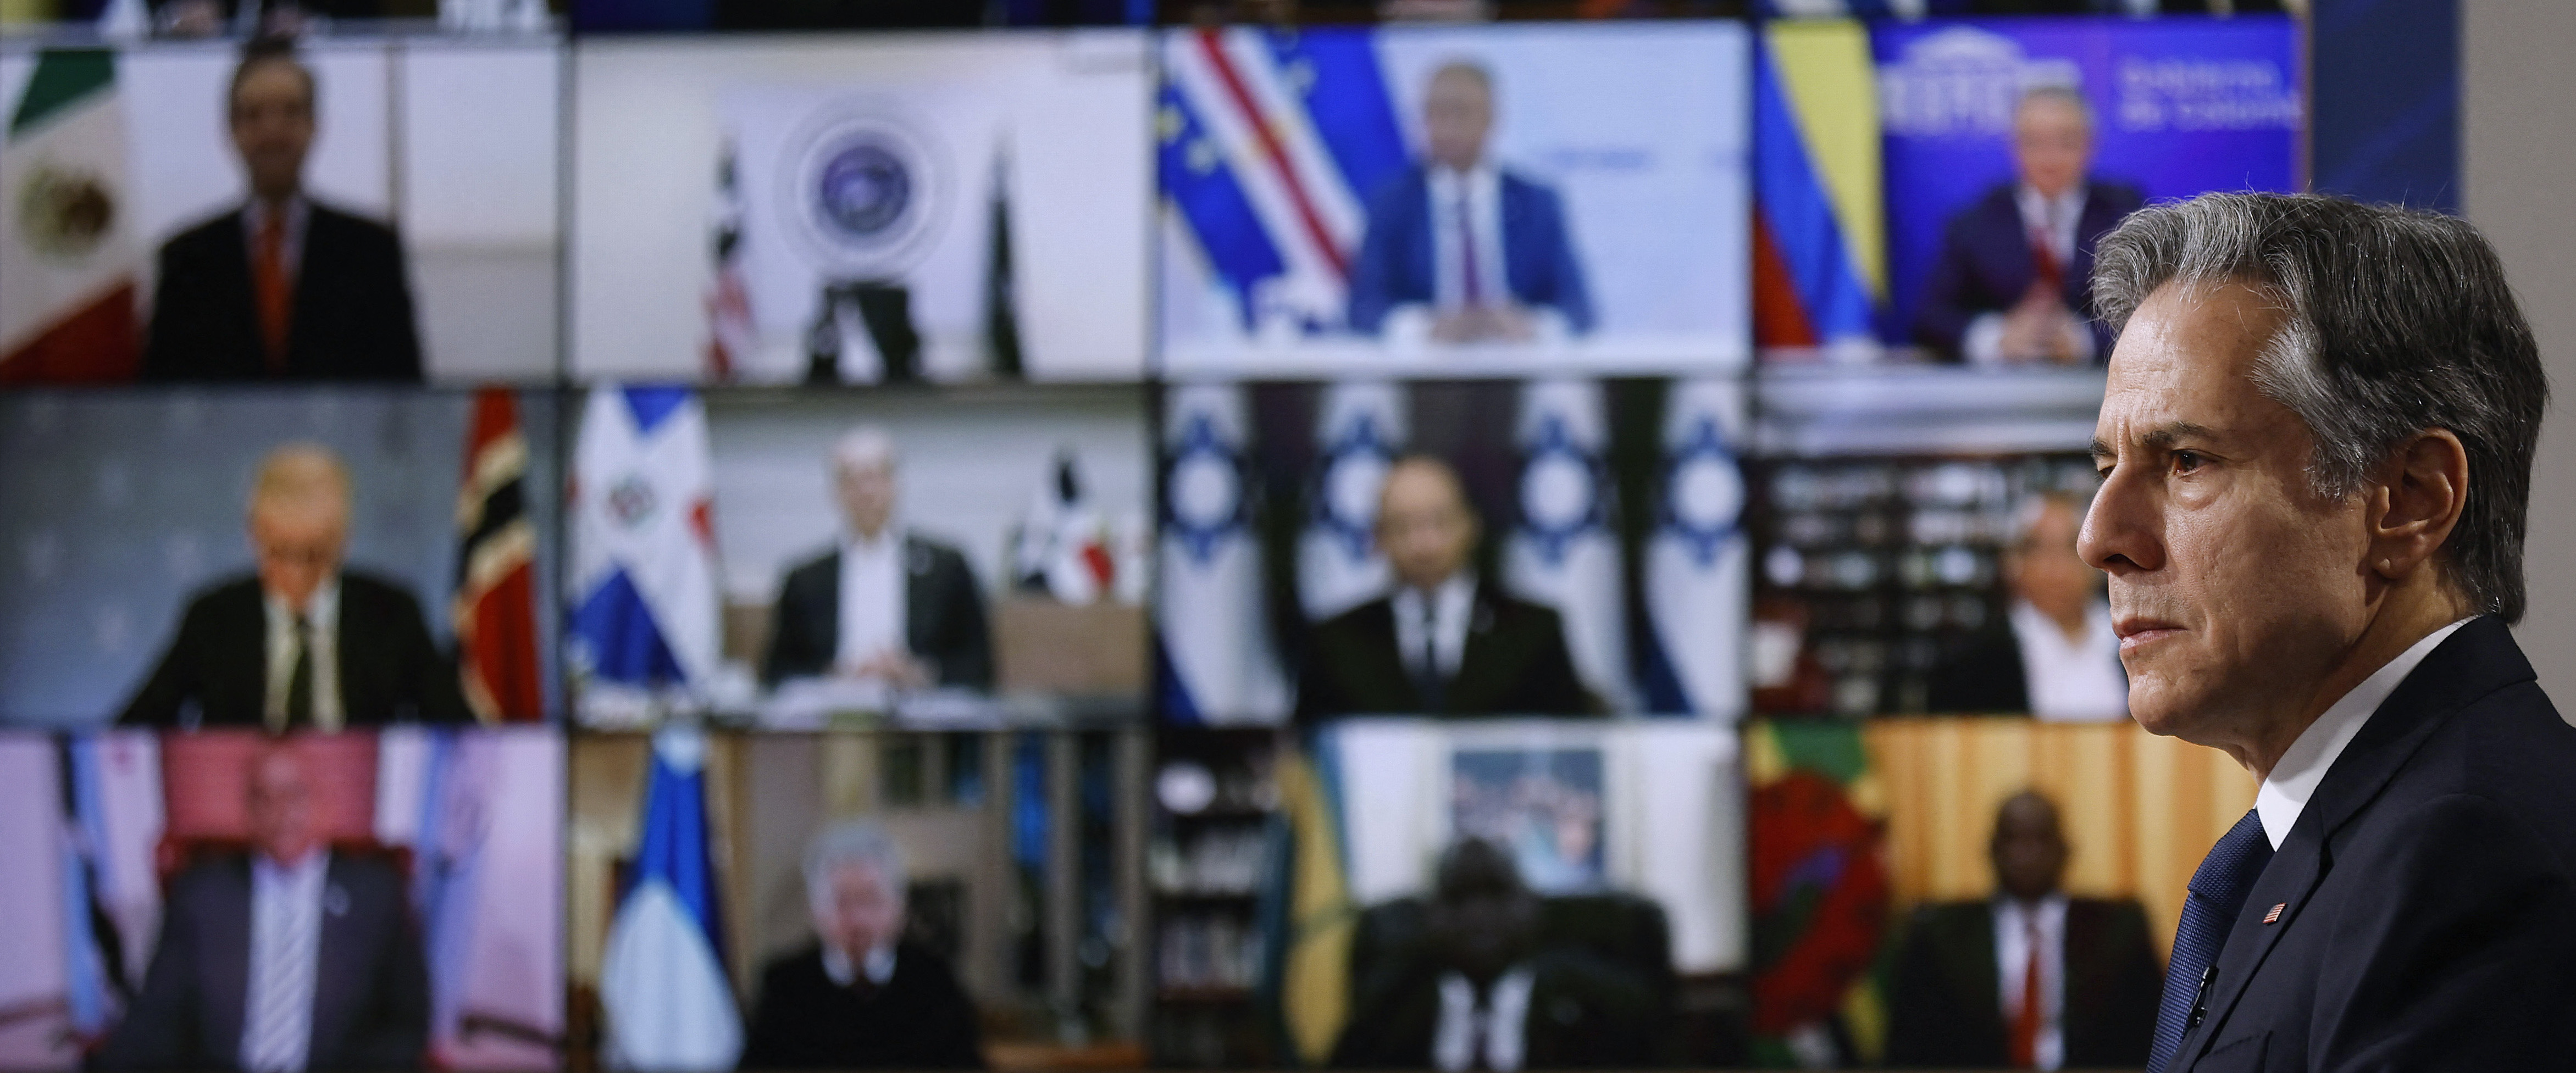 U.S. Secretary of State Antony Blinken participates in the virtual Summit for Democracy in the South Court Auditorium on December 09, 2021 in Washington, DC